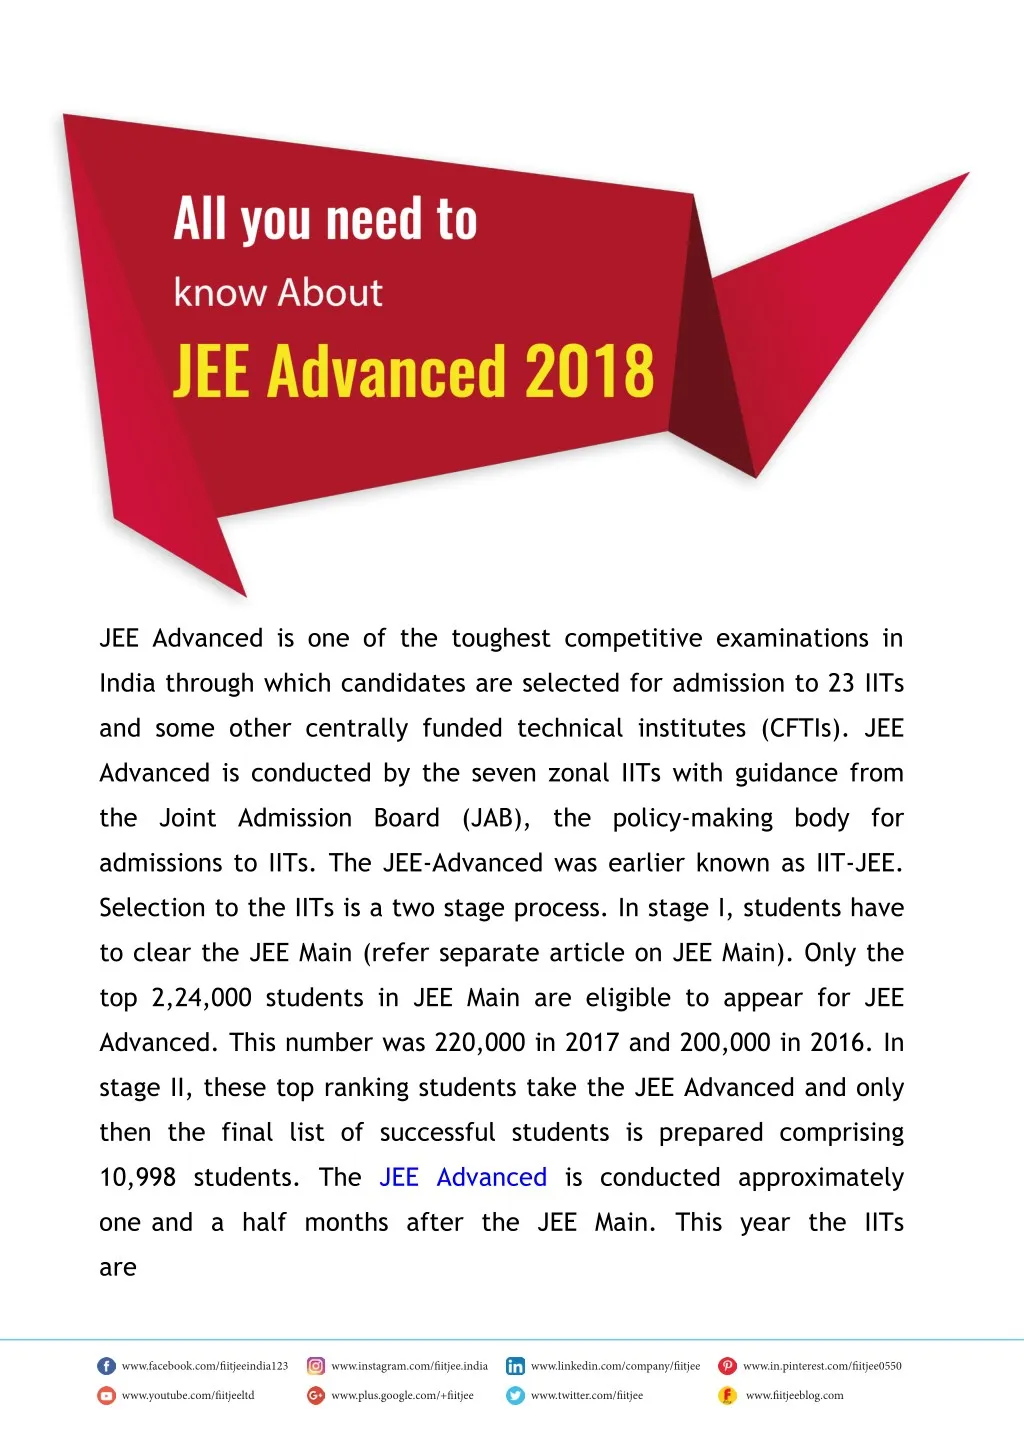 jee advanced is one of the toughest competitive